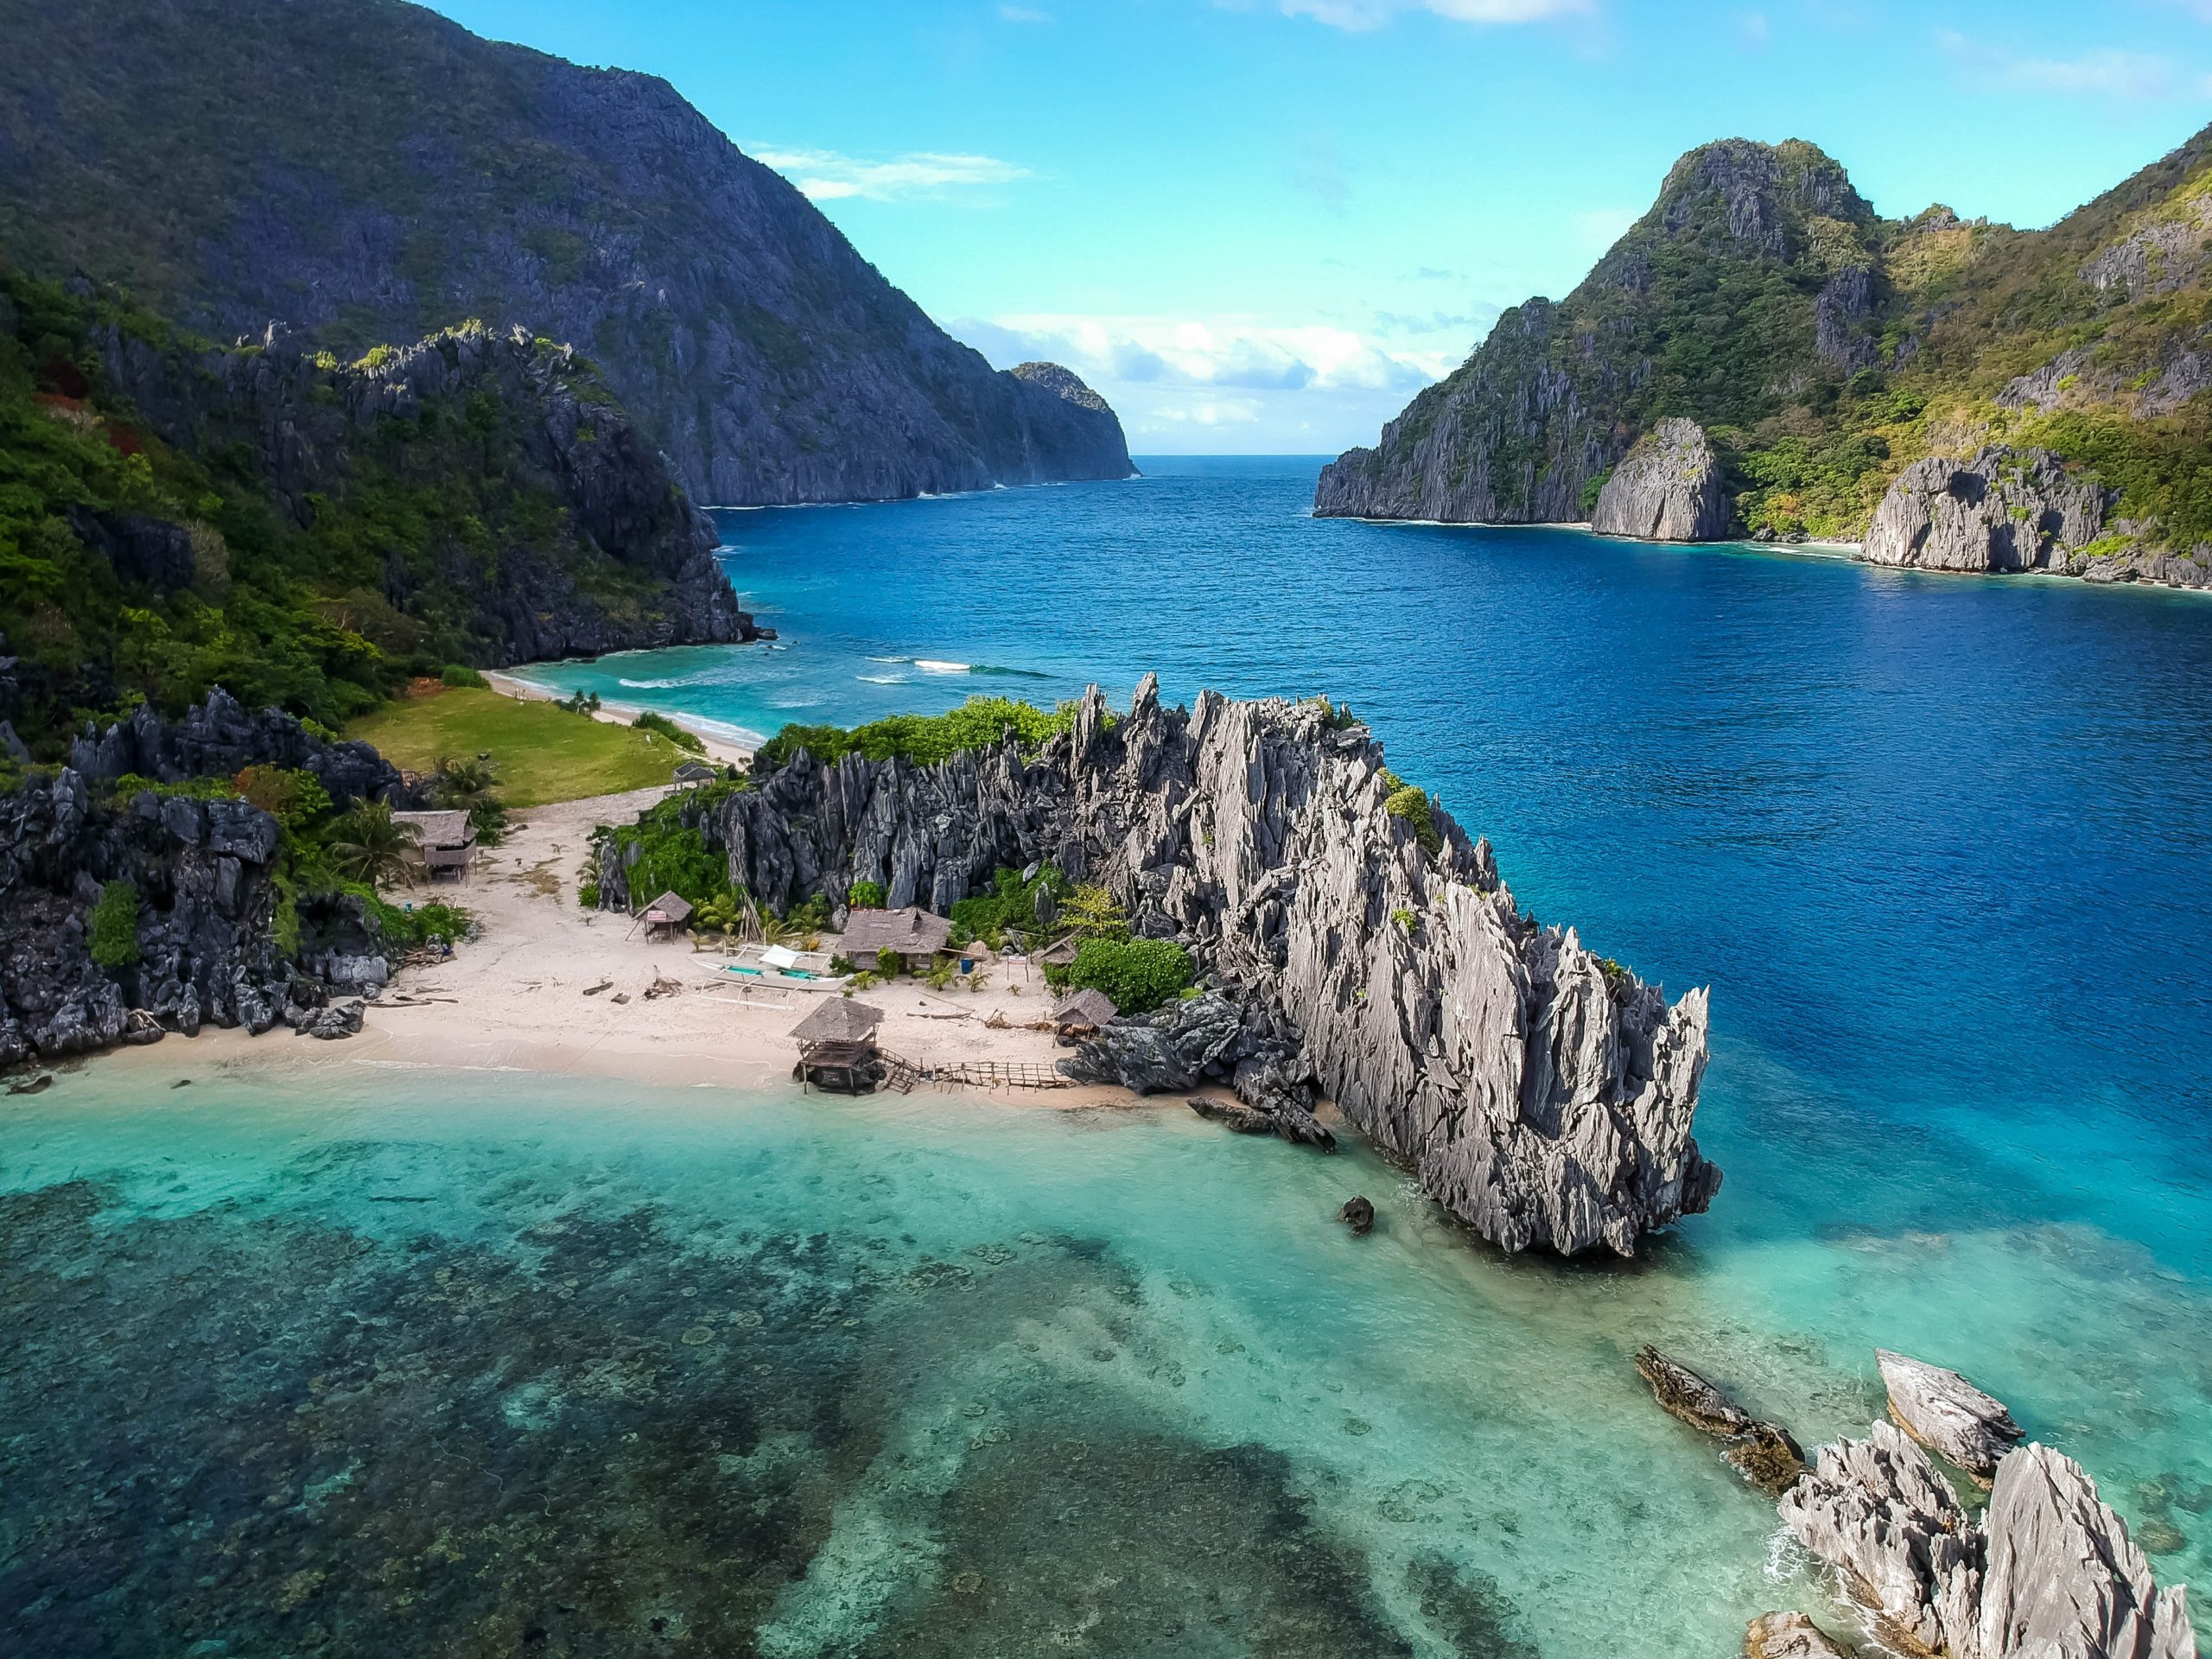 A rocky features on the beach surrounded by clear water and mountans in the Philippines